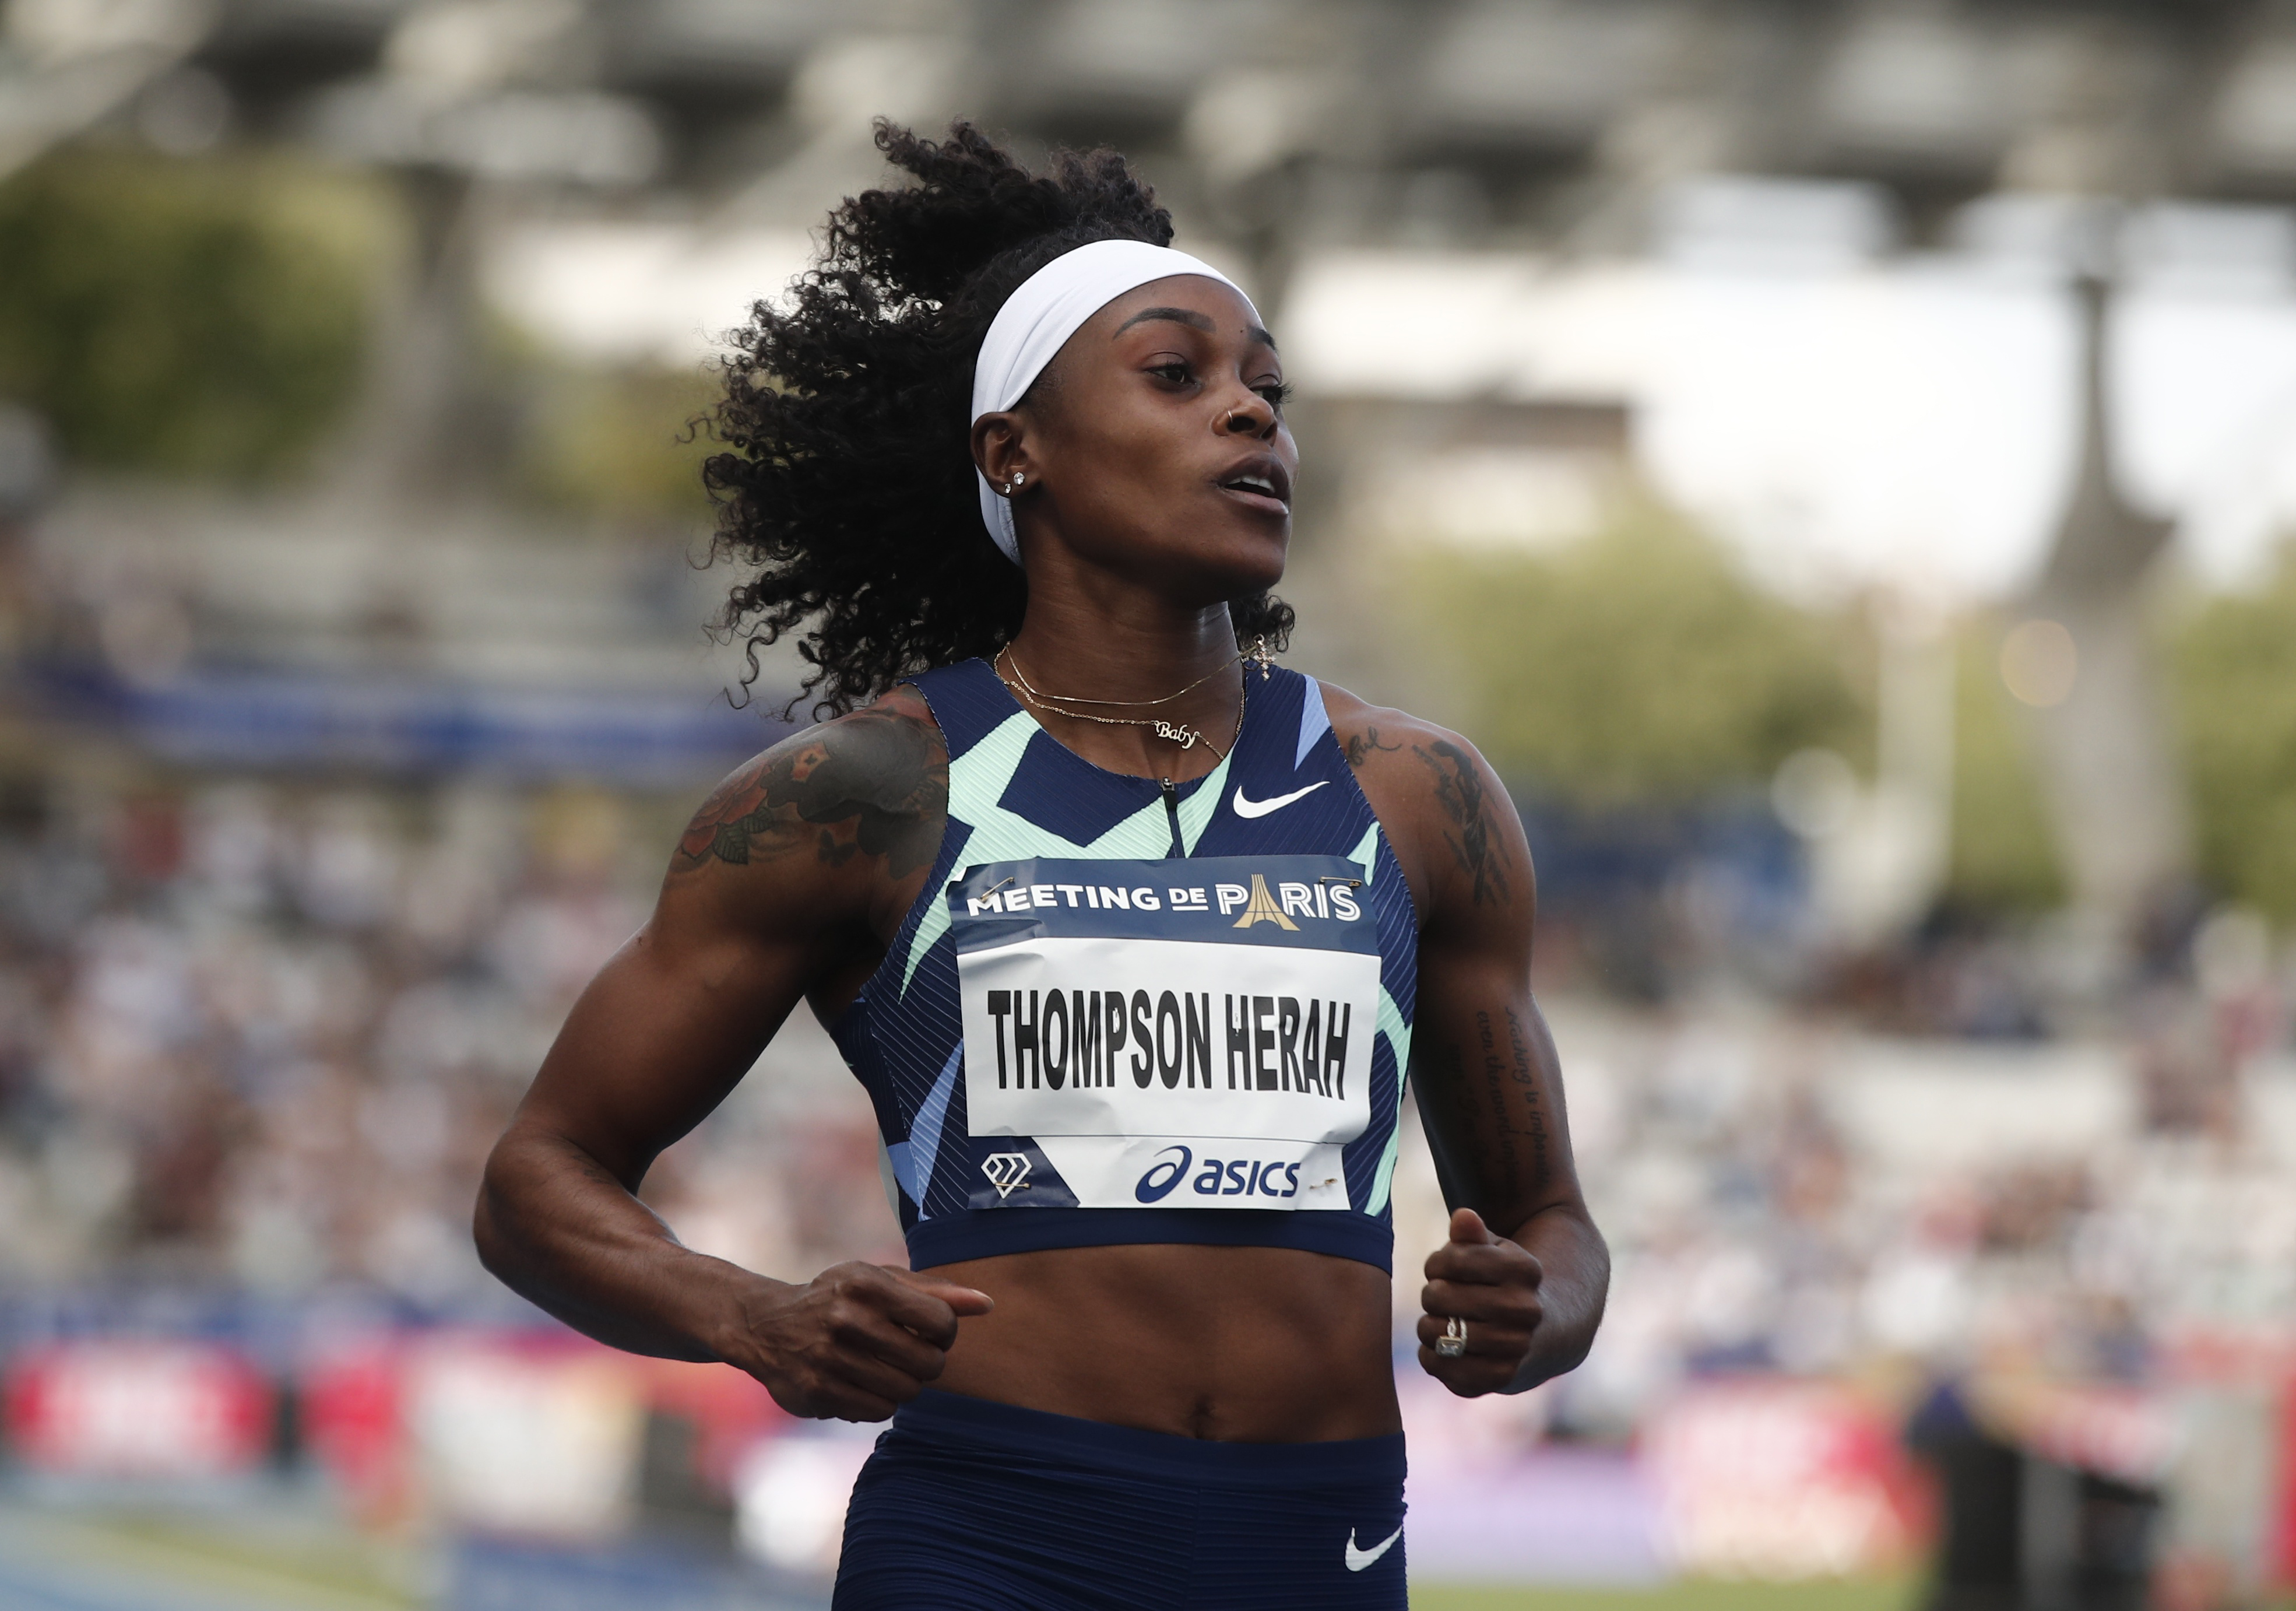 Elaine Thompson-Herah is one of about a dozen Olympic gold medalists competing at the Prefontaine Classic